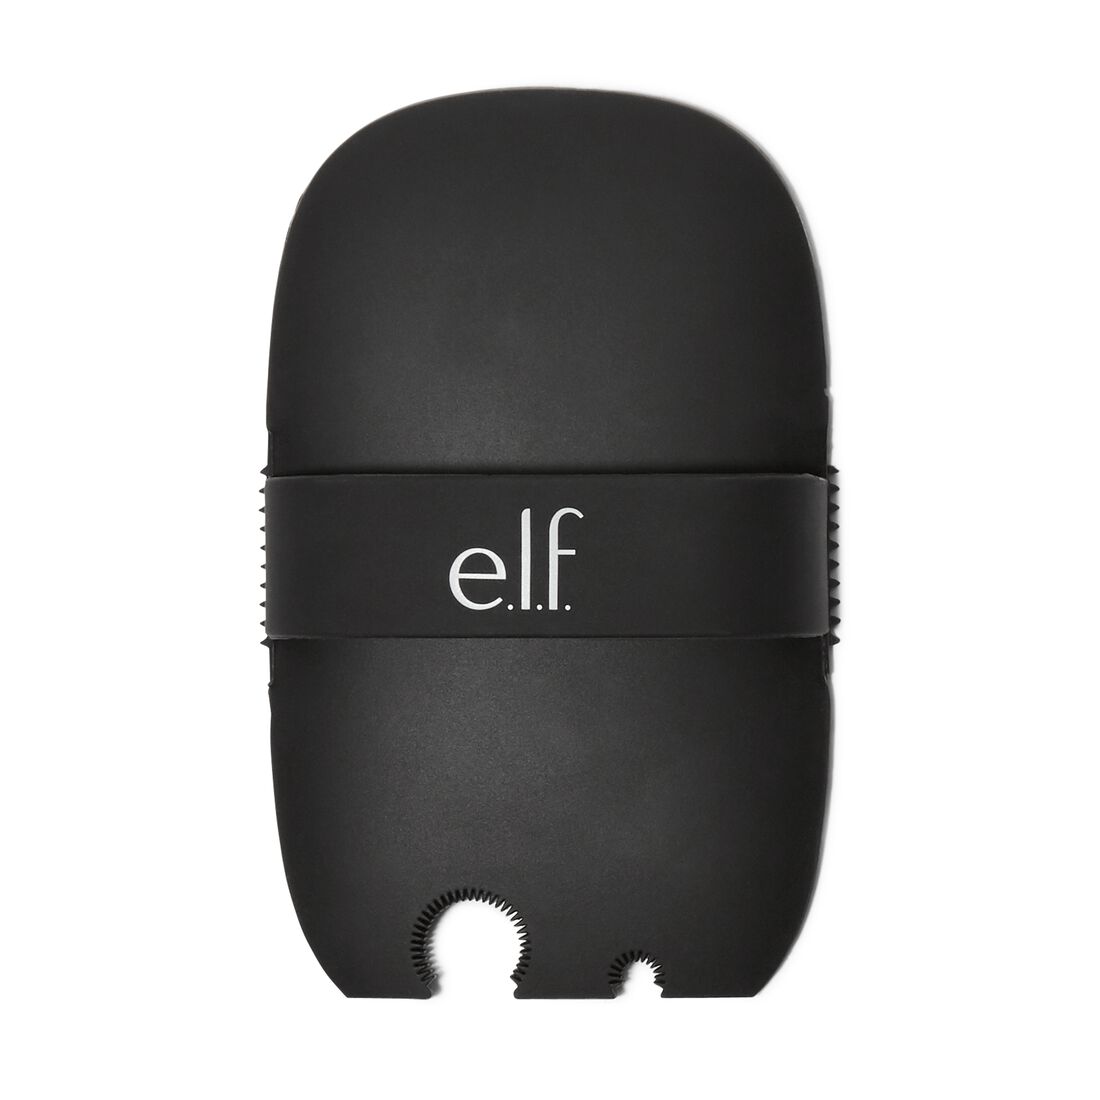 e.l.f. Makeup Brush Cleaning Glove